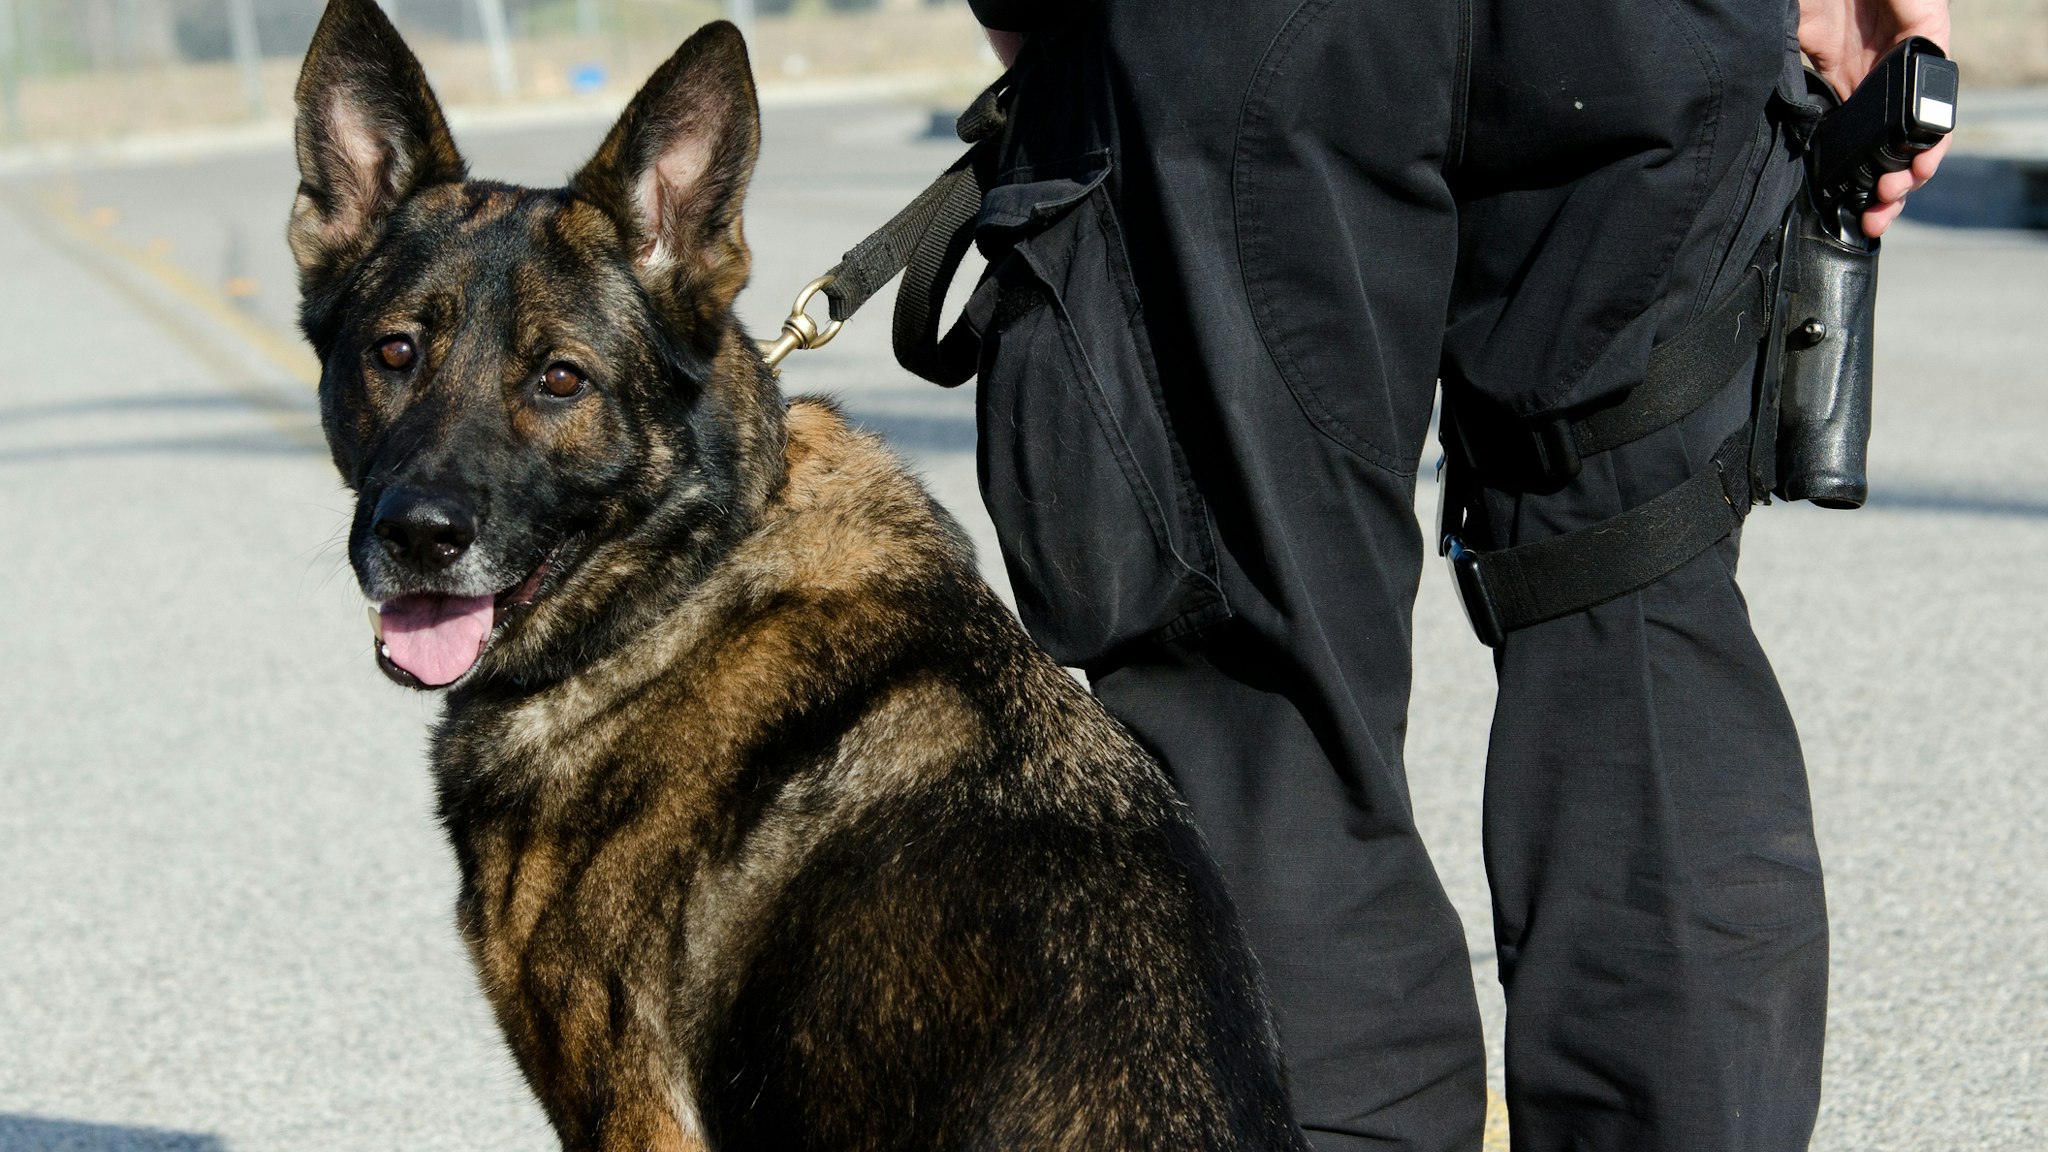 A k9 handler standing with his partner as the dog looks back.